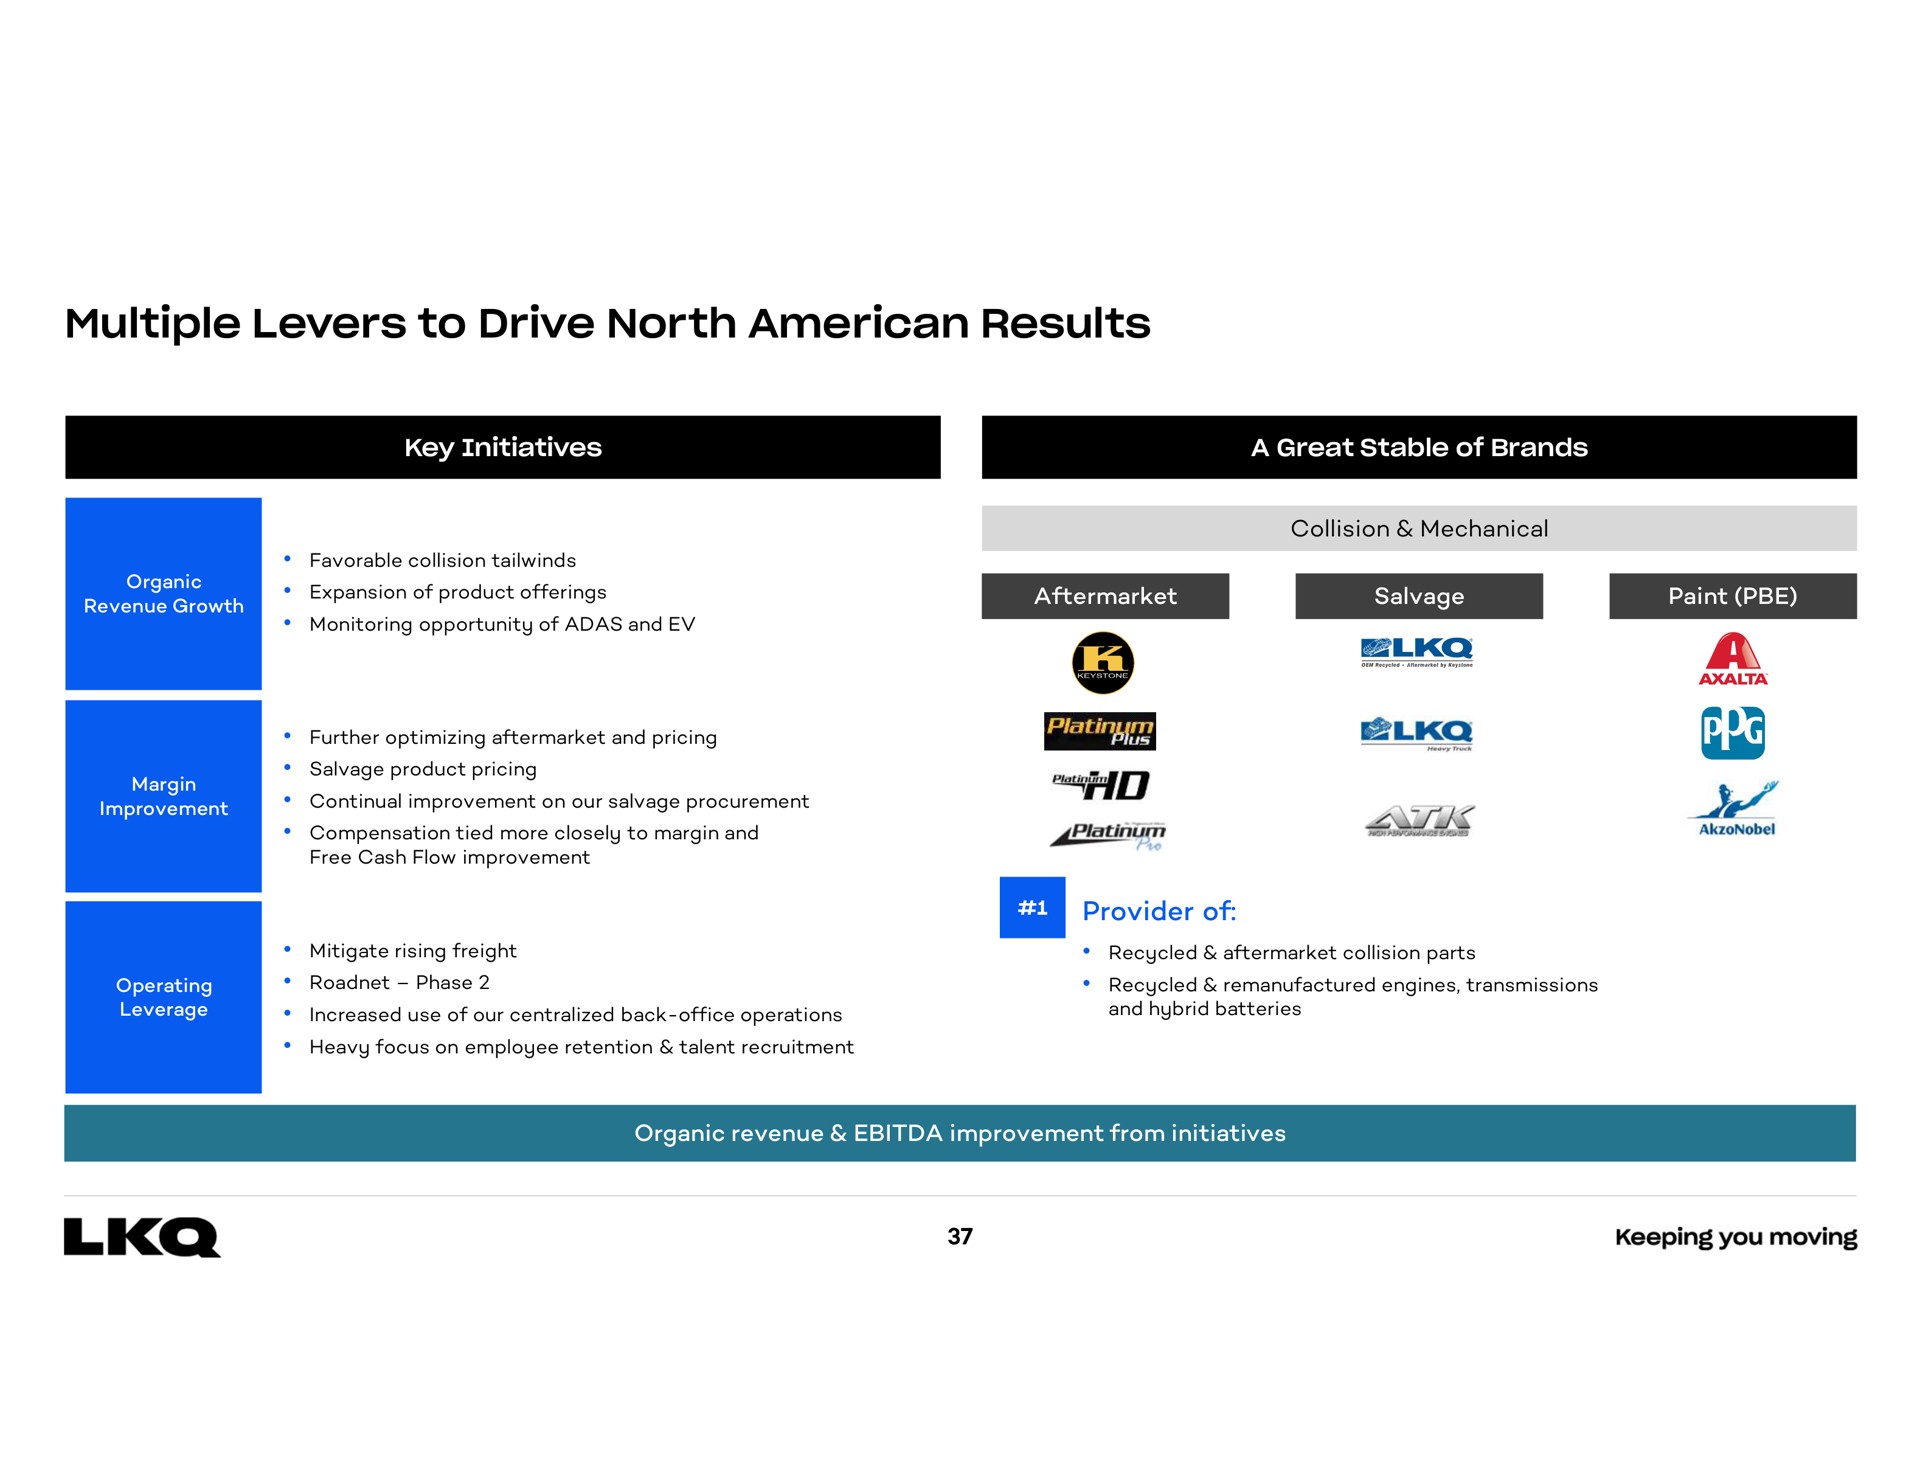 multiple levers to drive north results provider of | LKQ